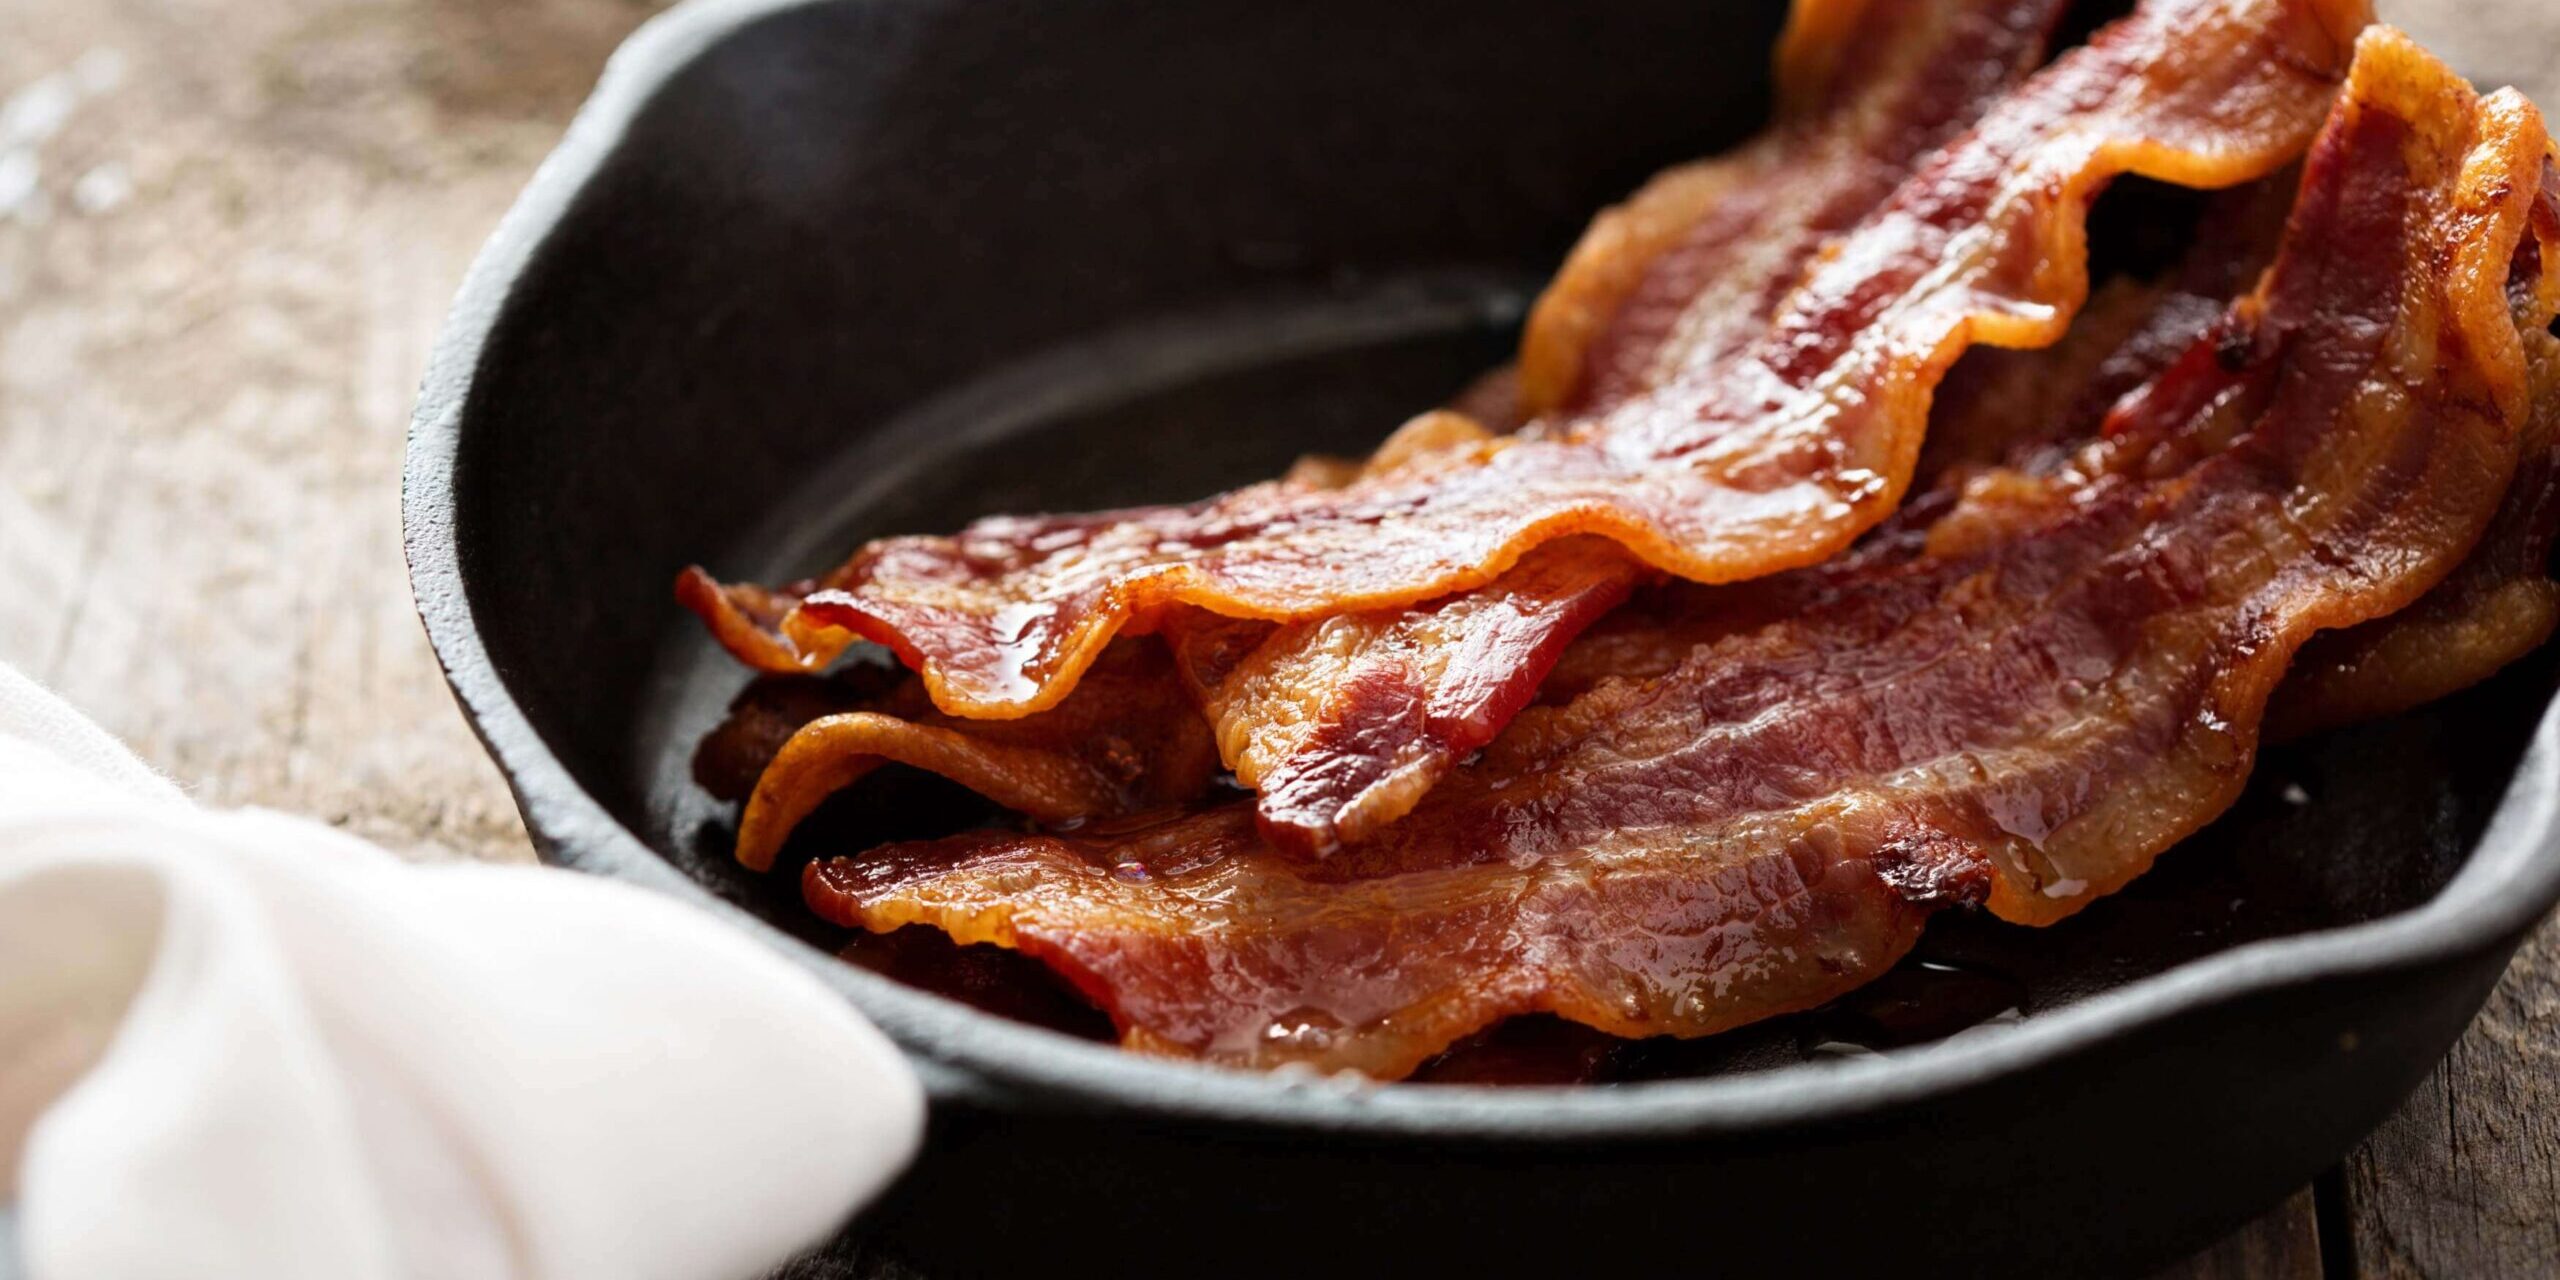 Saving your bacon by getting you out of Linux server trouble